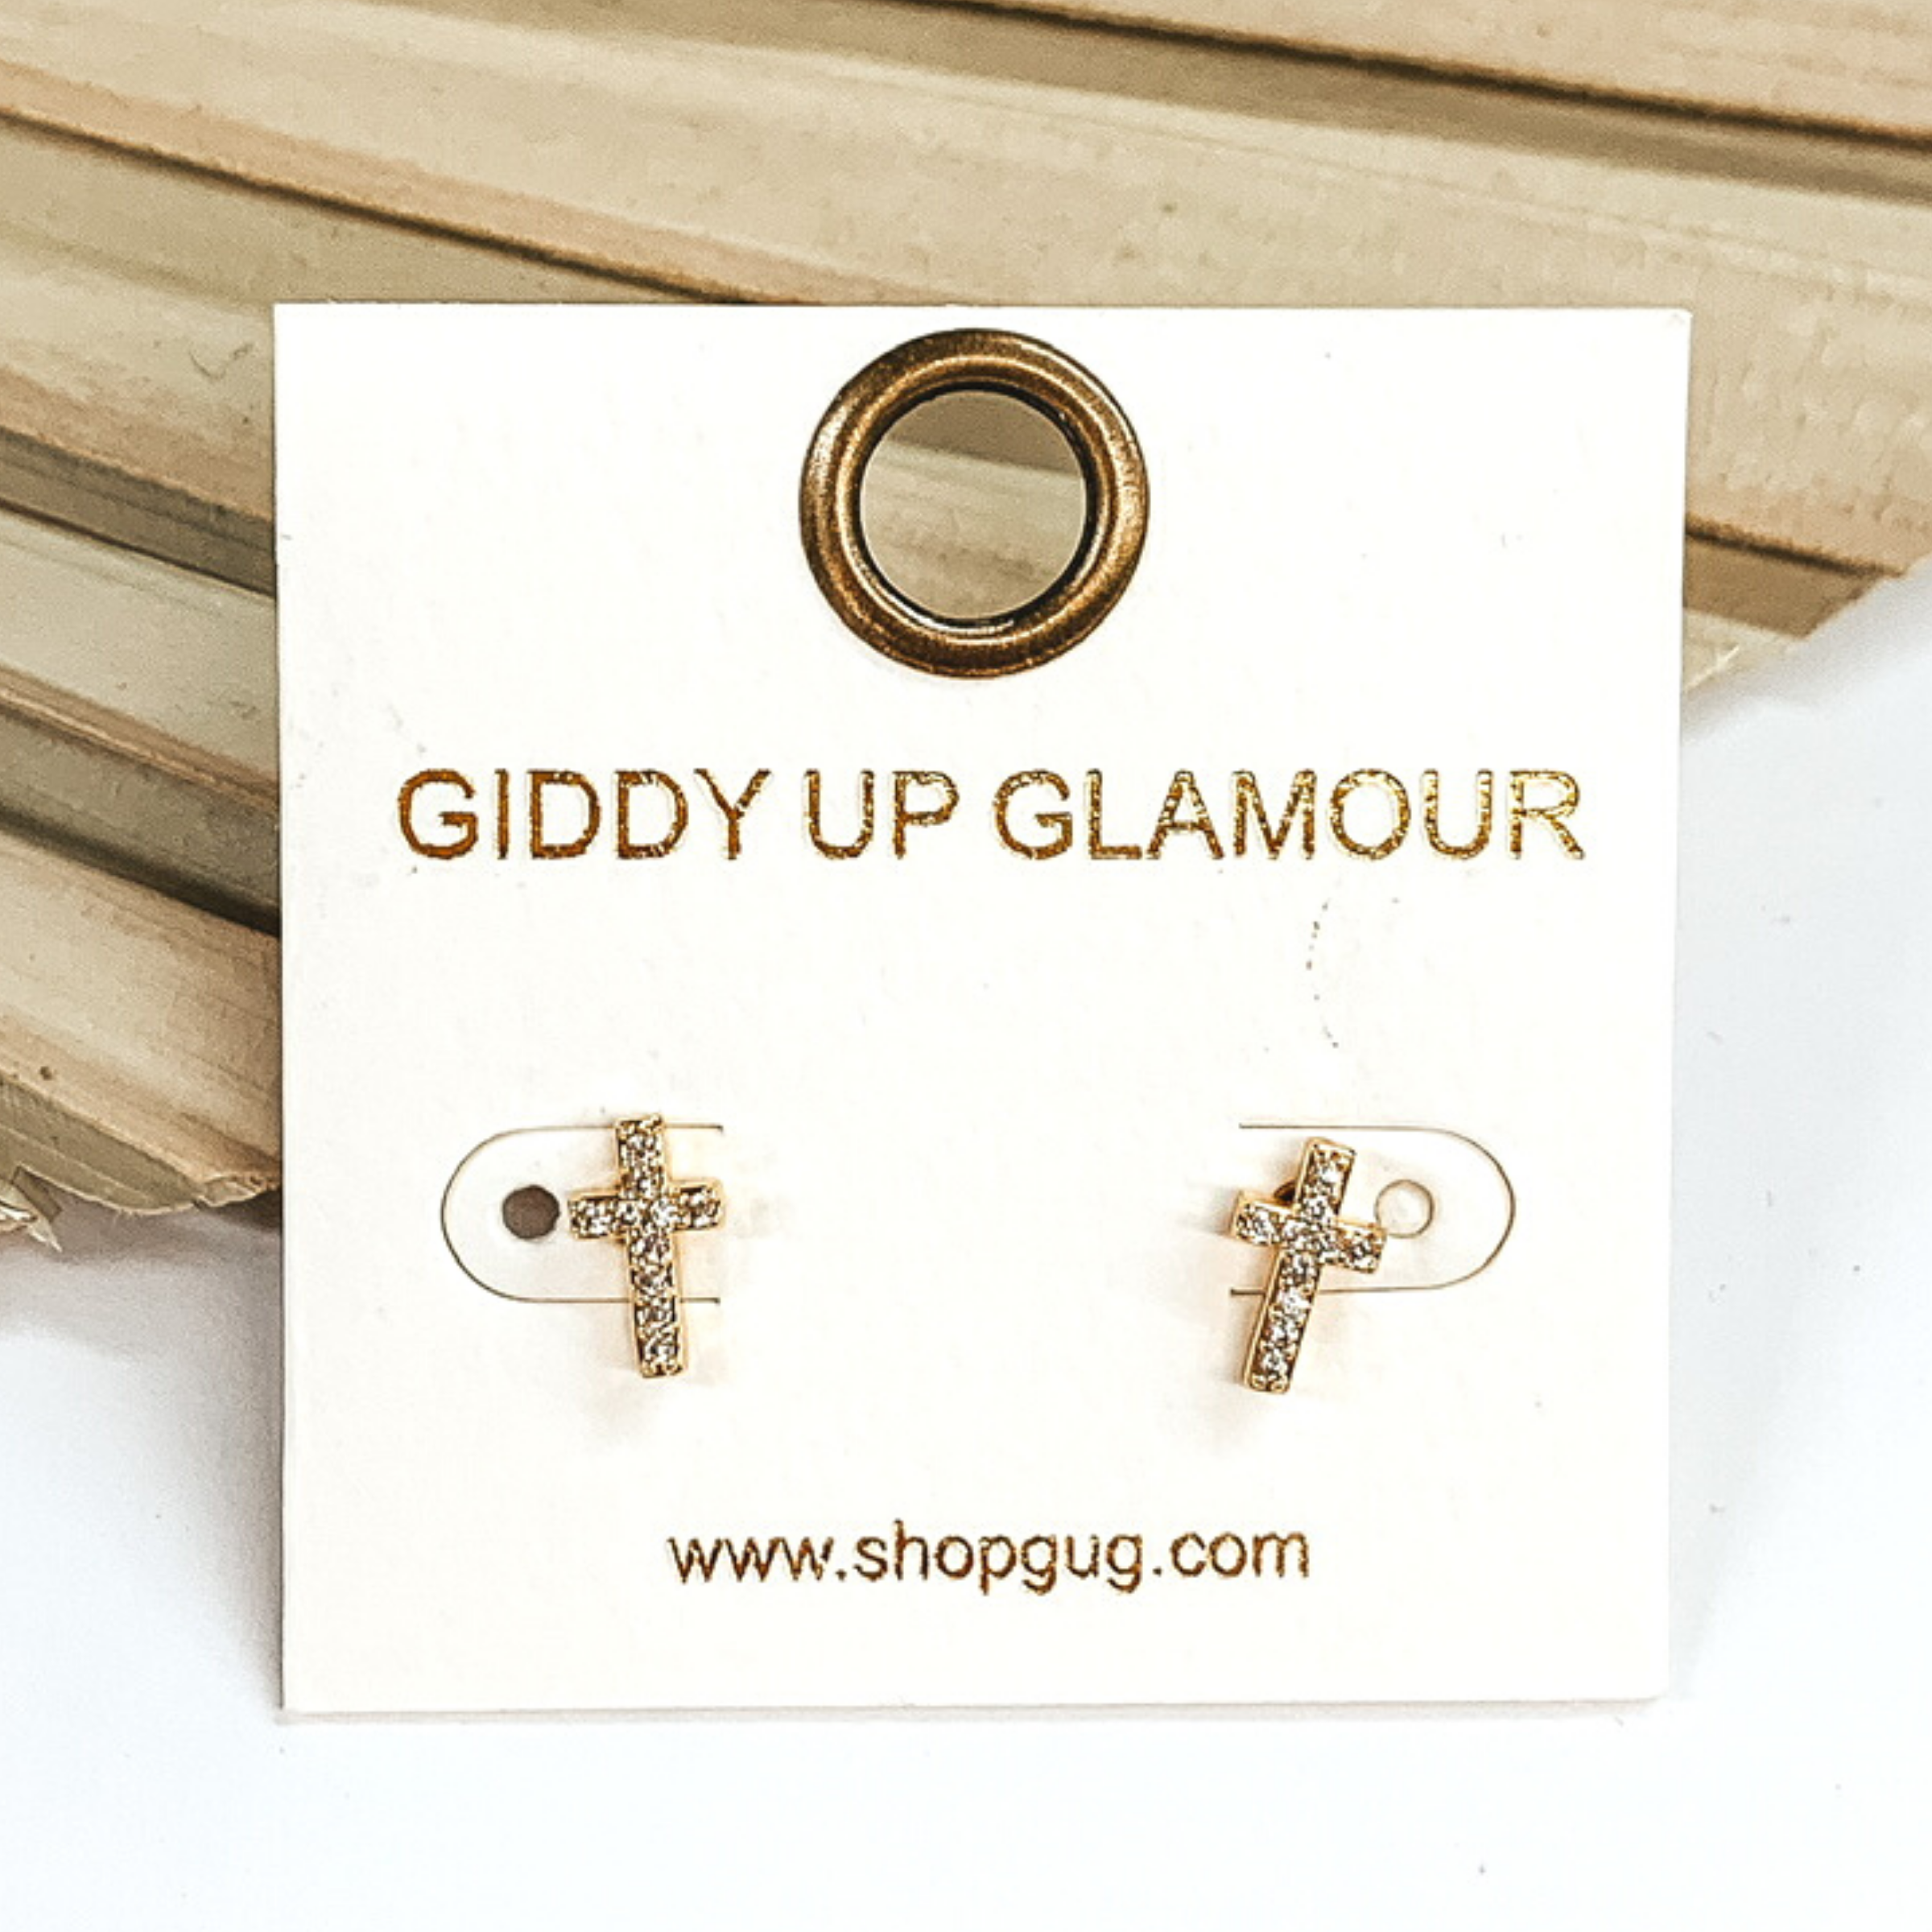 Small, gold cross stud earrings with clear crystals. These earrings are pictured on a white earrings card on a white and brown background.